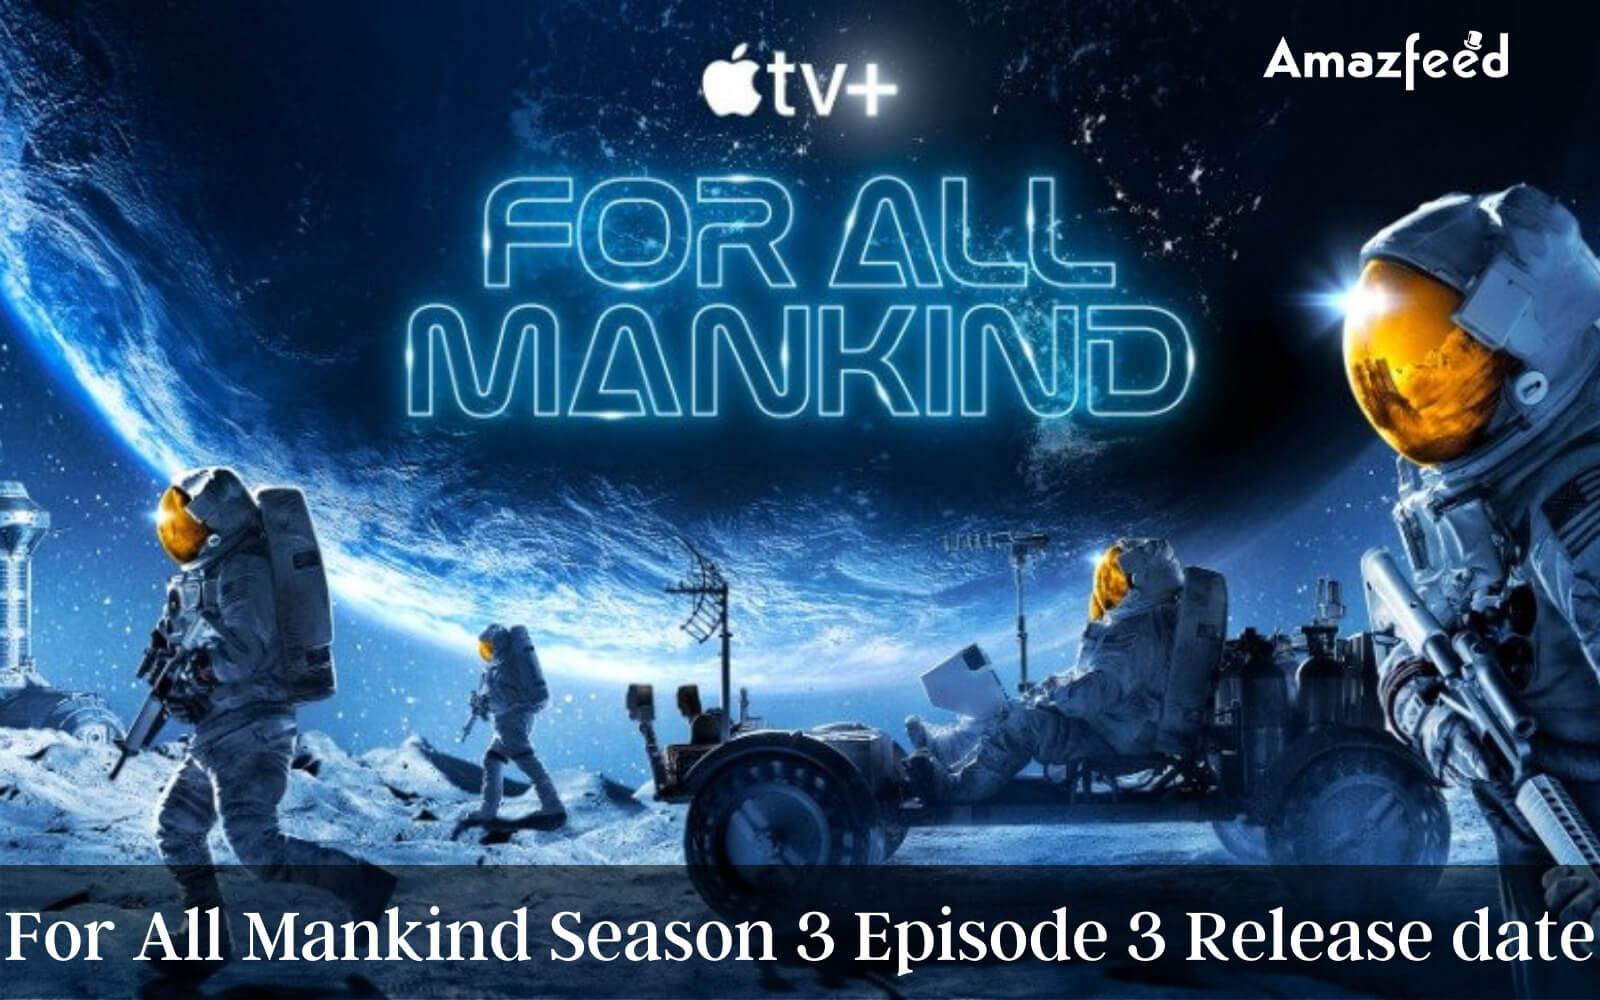 For All Mankind Season 3 Episode 3 Release date